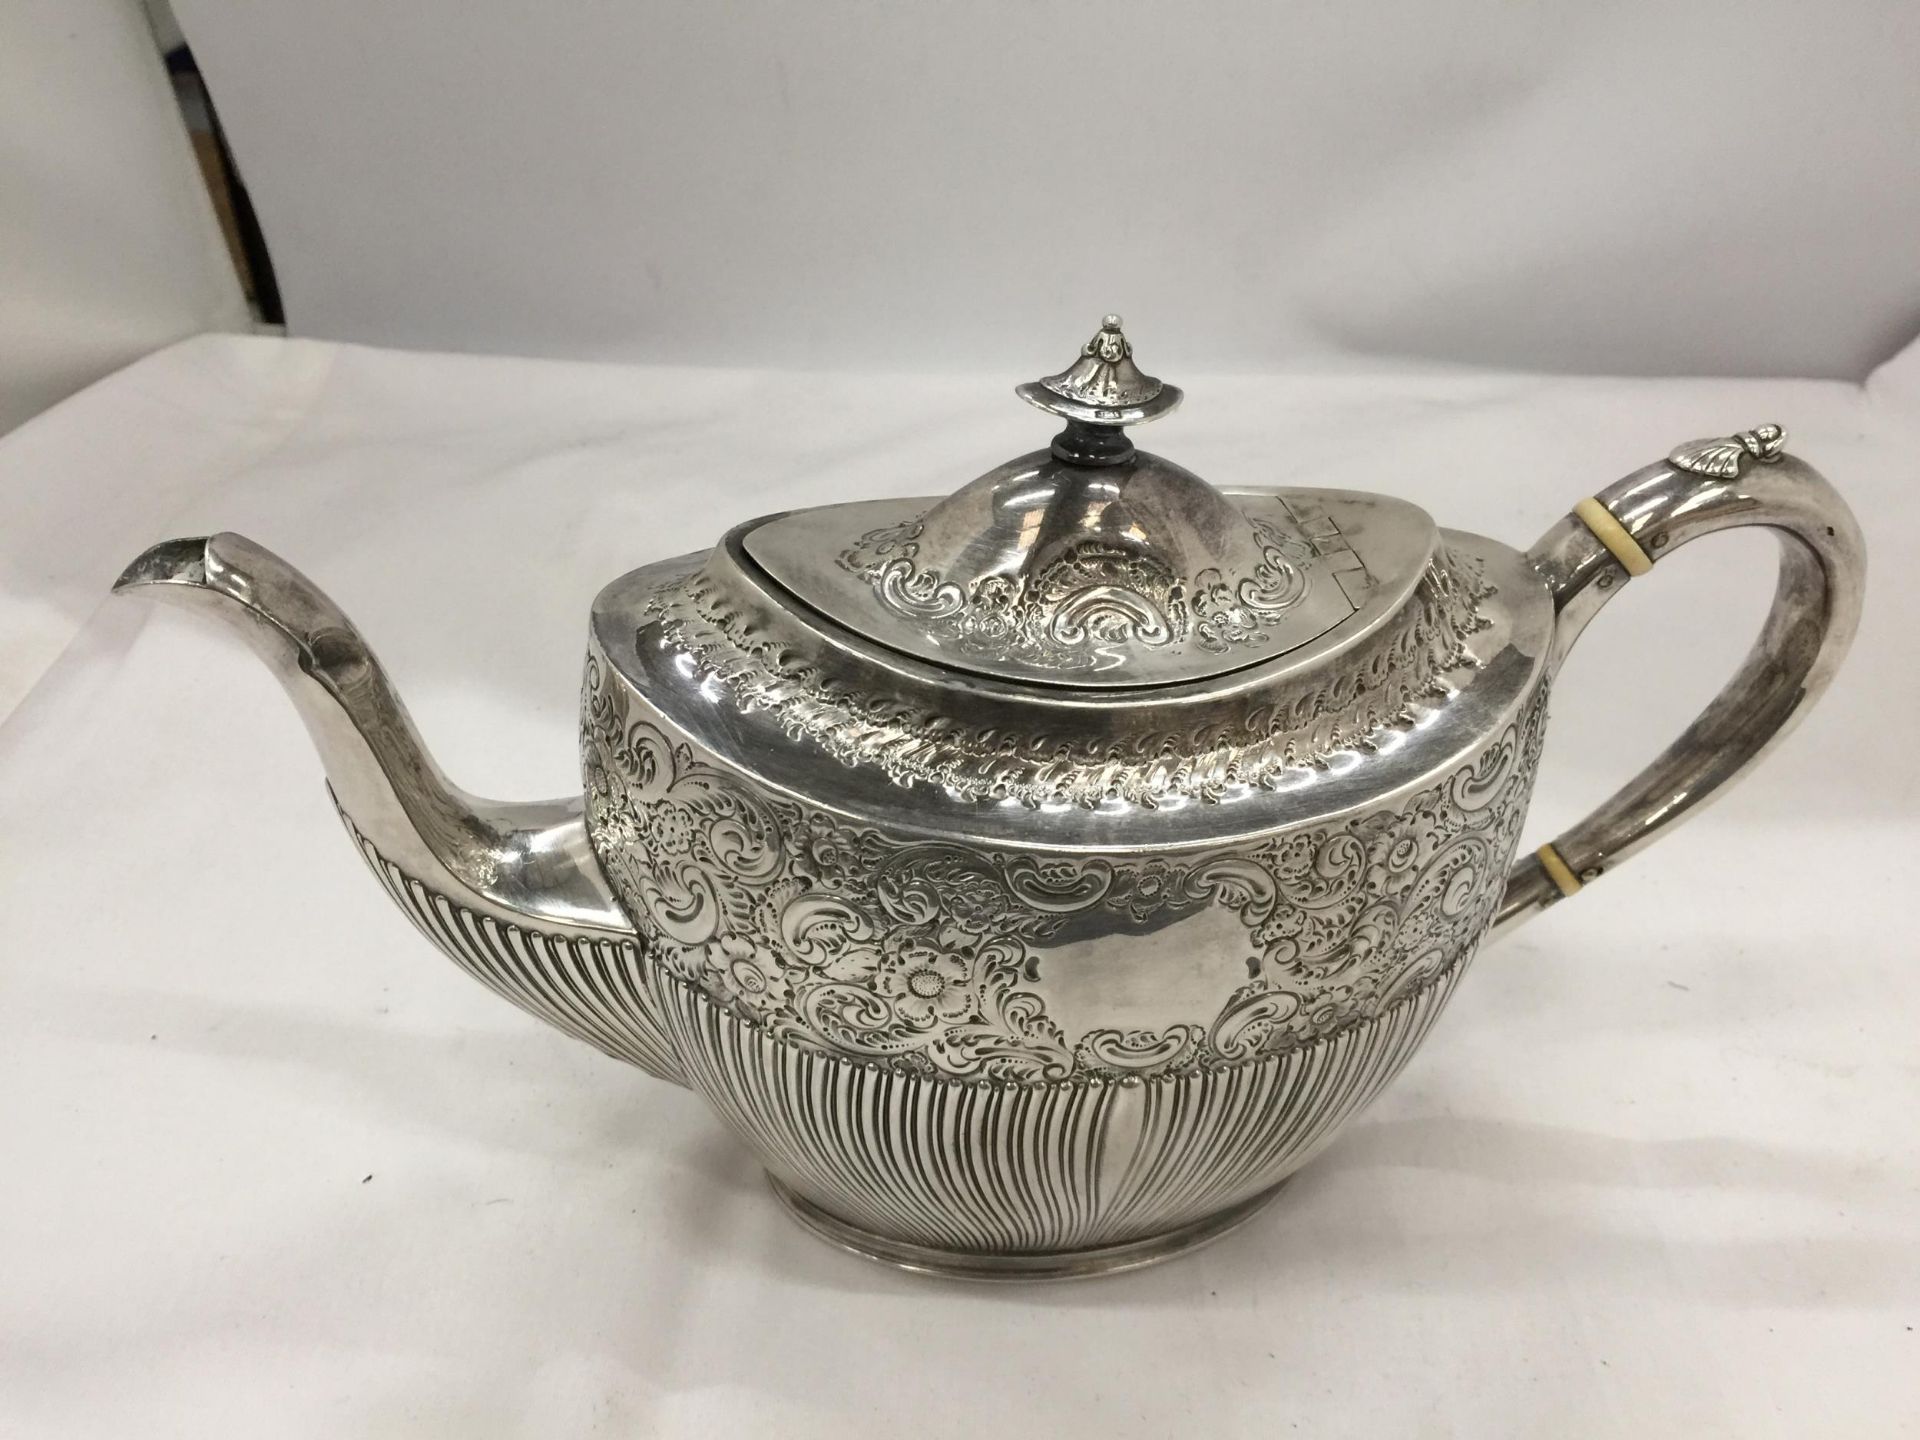 AN EDWARD VII 1902 SILVER TEAPOT WITH CHASED AND ENGRAVED FLORAL DESIGN, MAKER INDISTINCT, GROSS 546 - Image 3 of 7